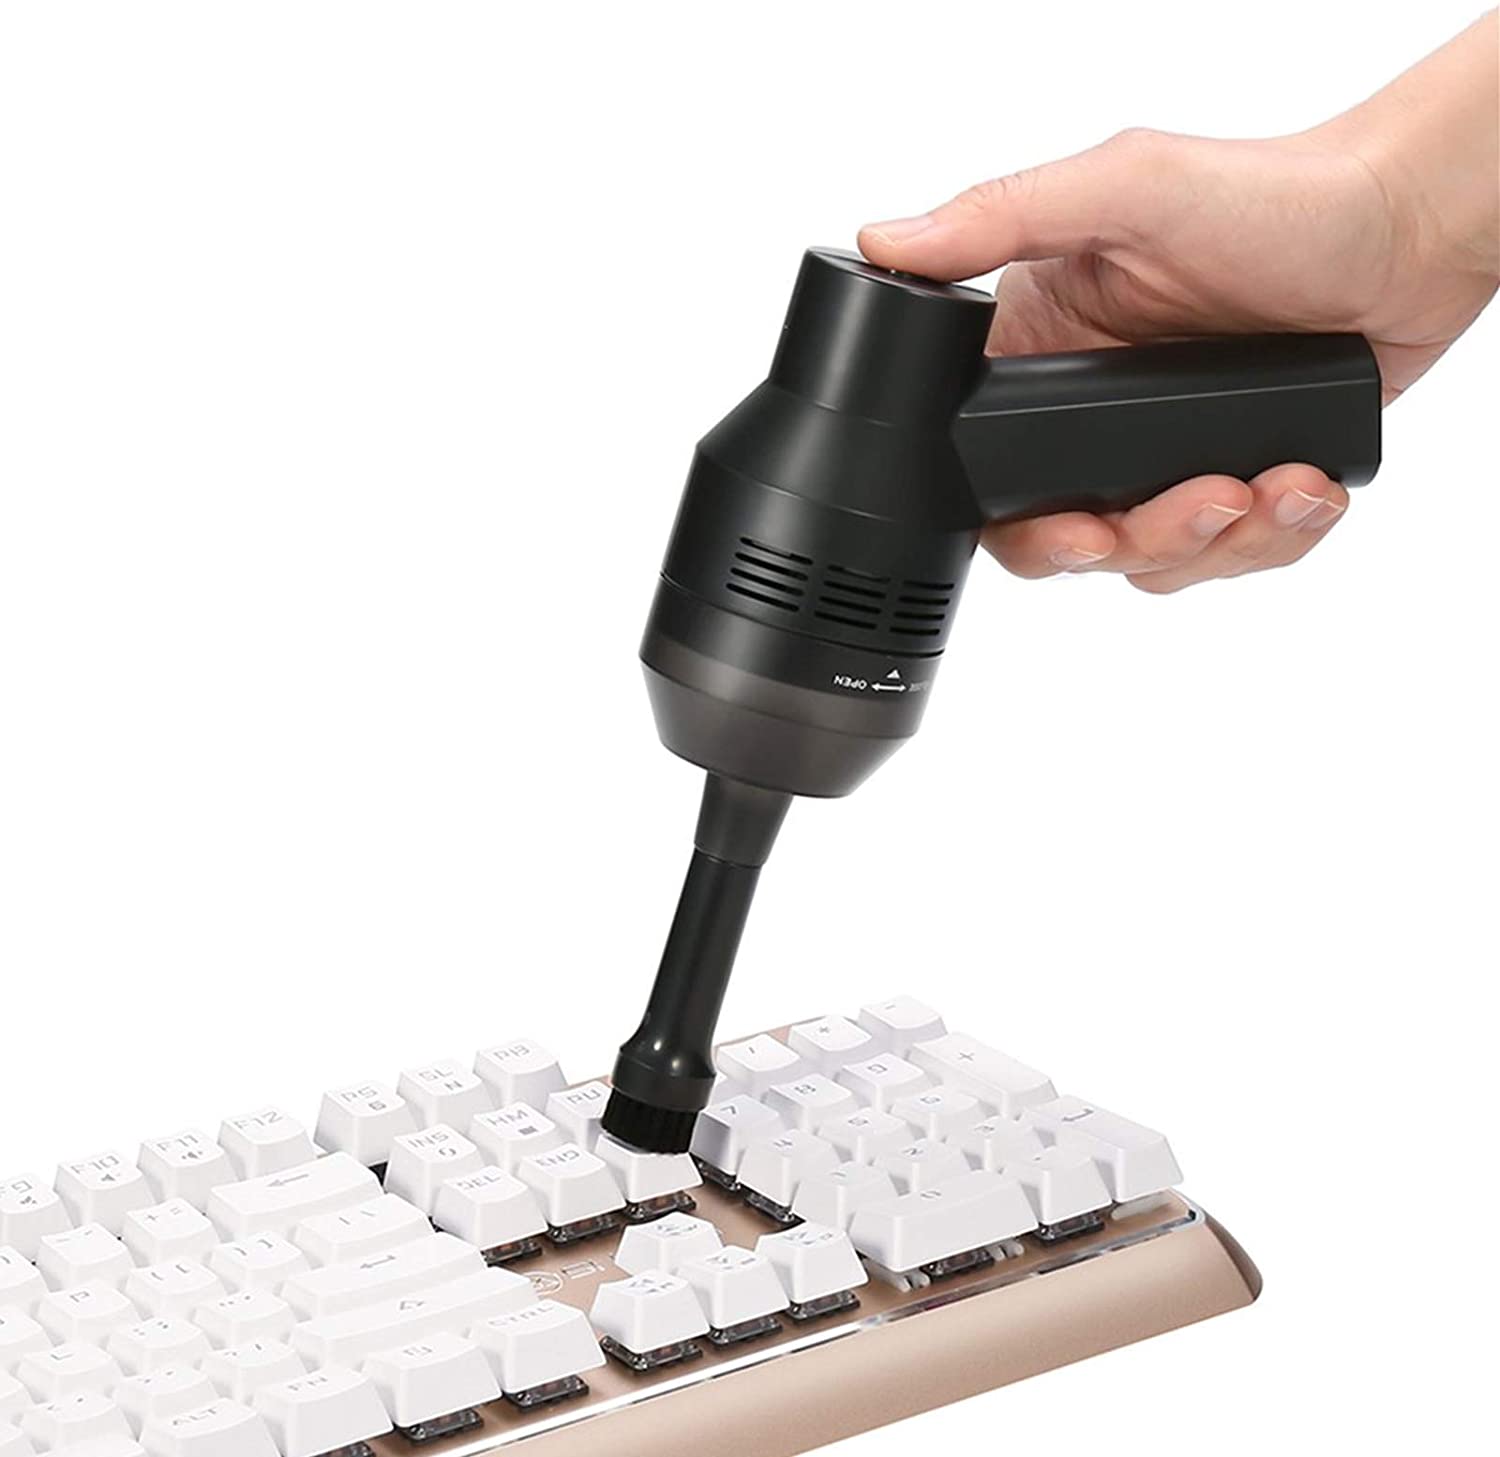 MECO Cordless & Rechargeable PC Keyboard Vacuum